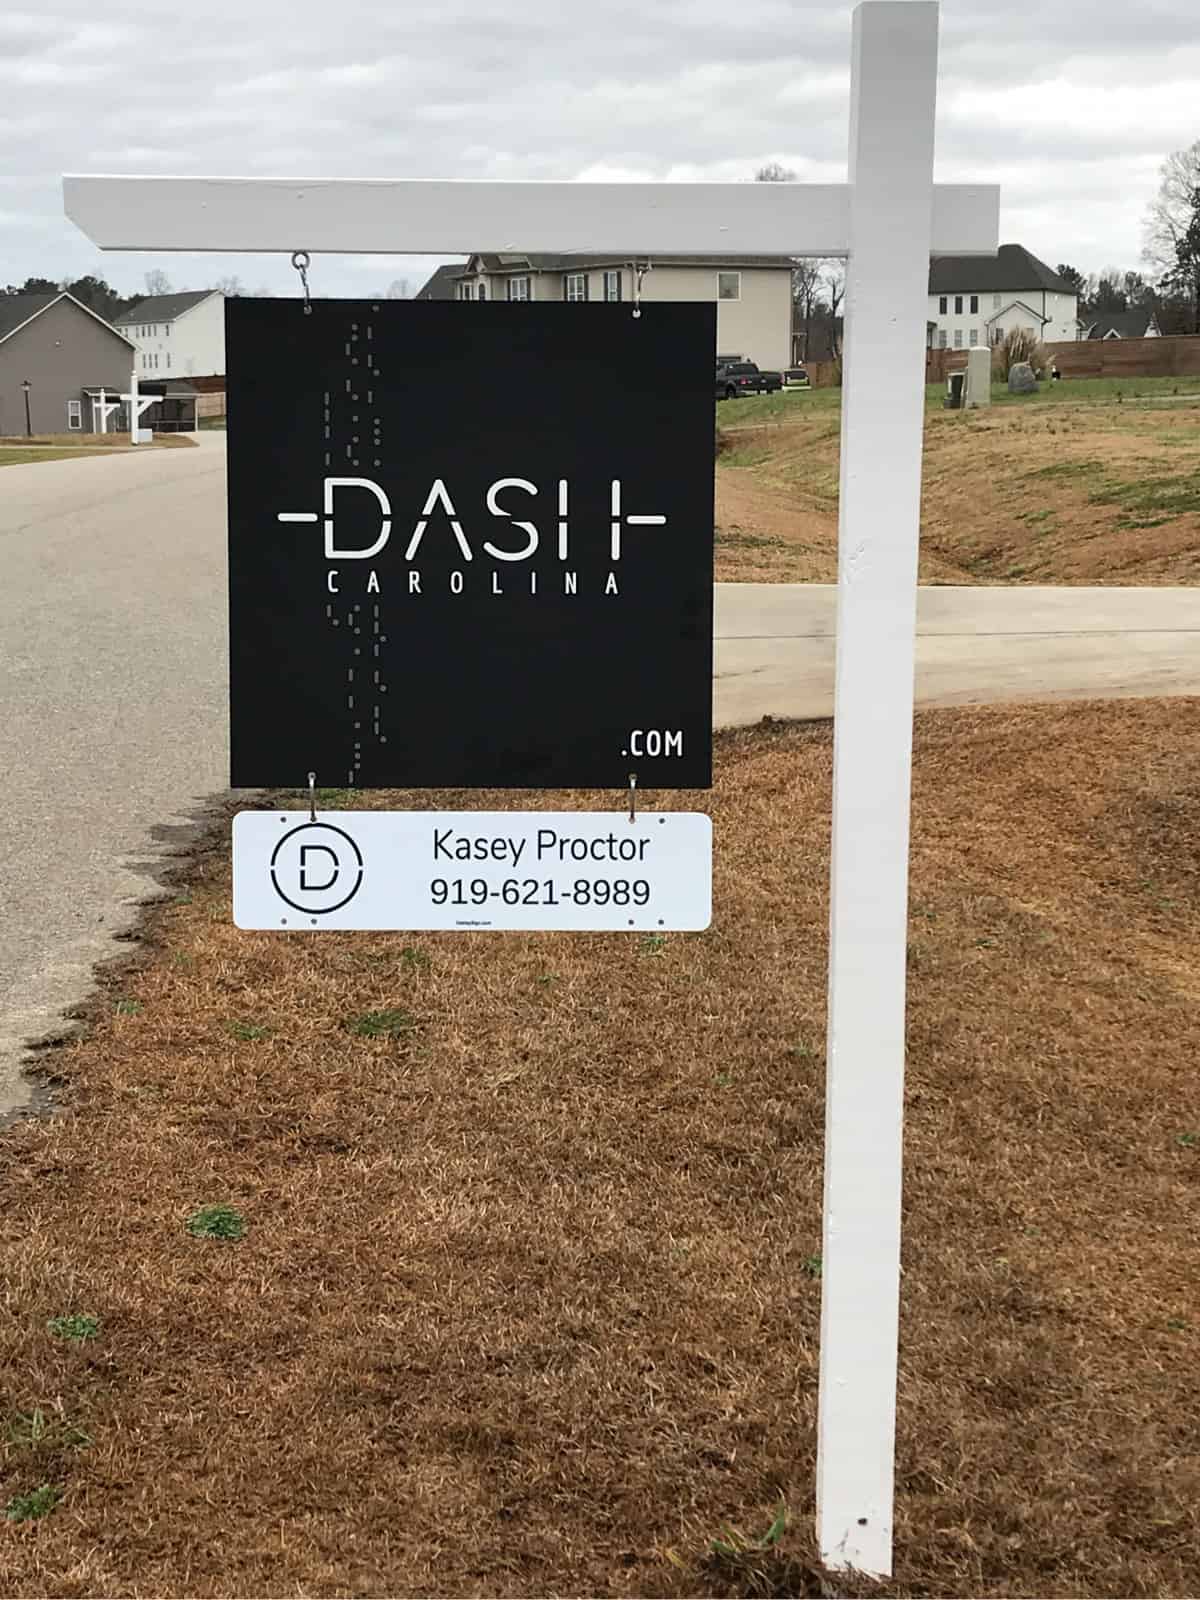 Residential Real estate sign installation